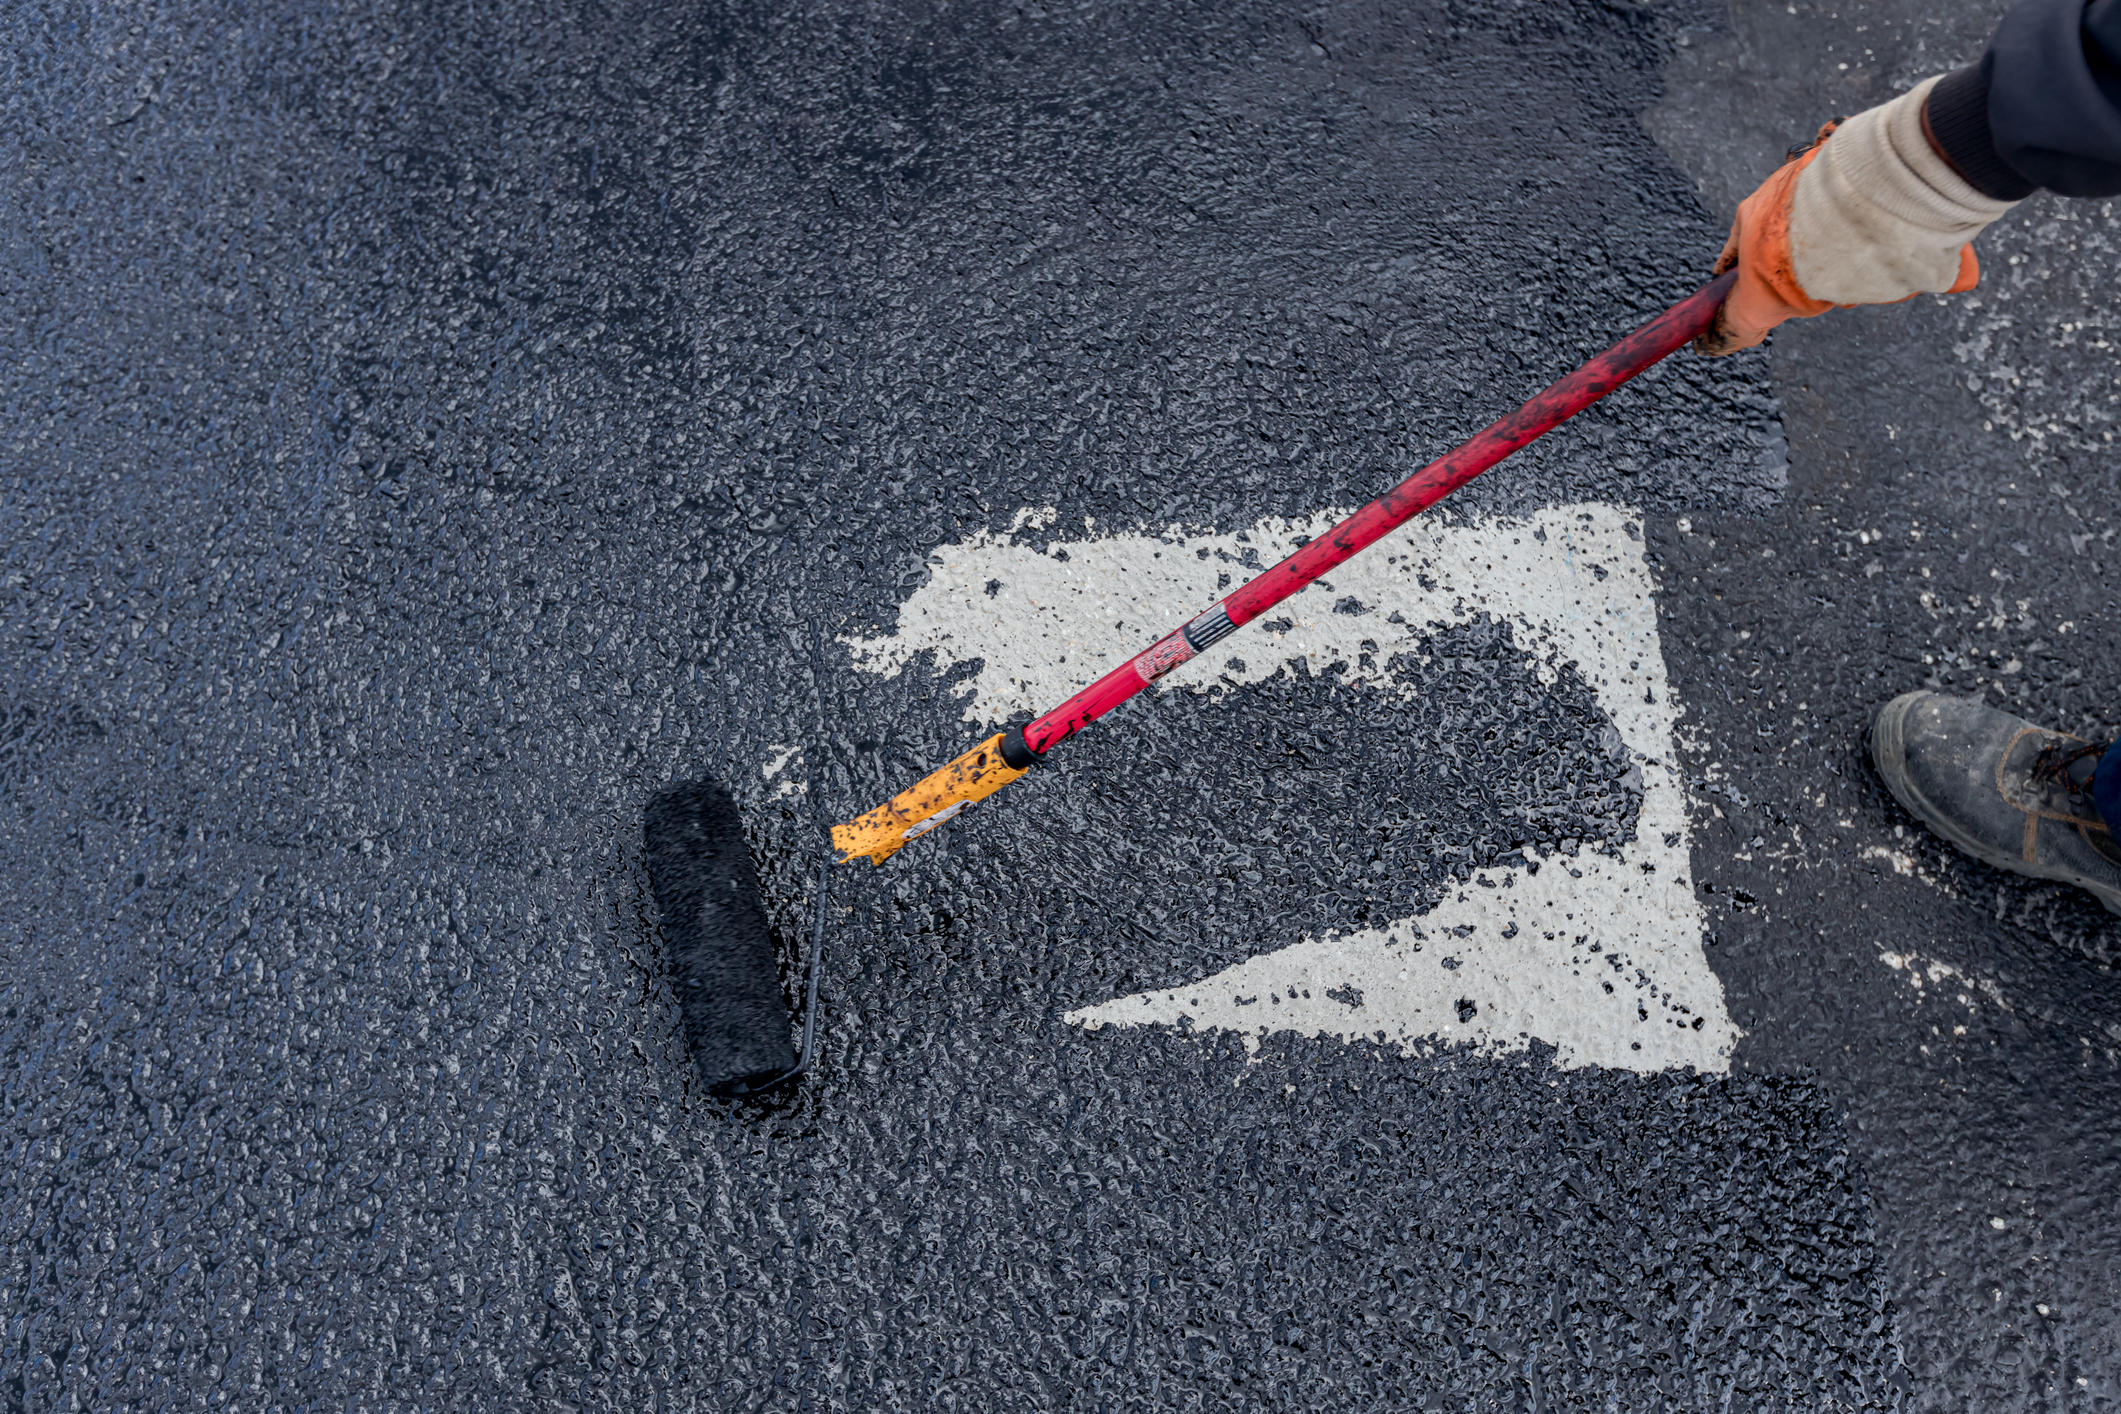 At High Quality Asphalt & Concrete we offer a variety of Asphalt services like overlays, removing and replacing, seal coating, crack filling, patching and so much more. Find out more about our High Quality services by giving us a call!